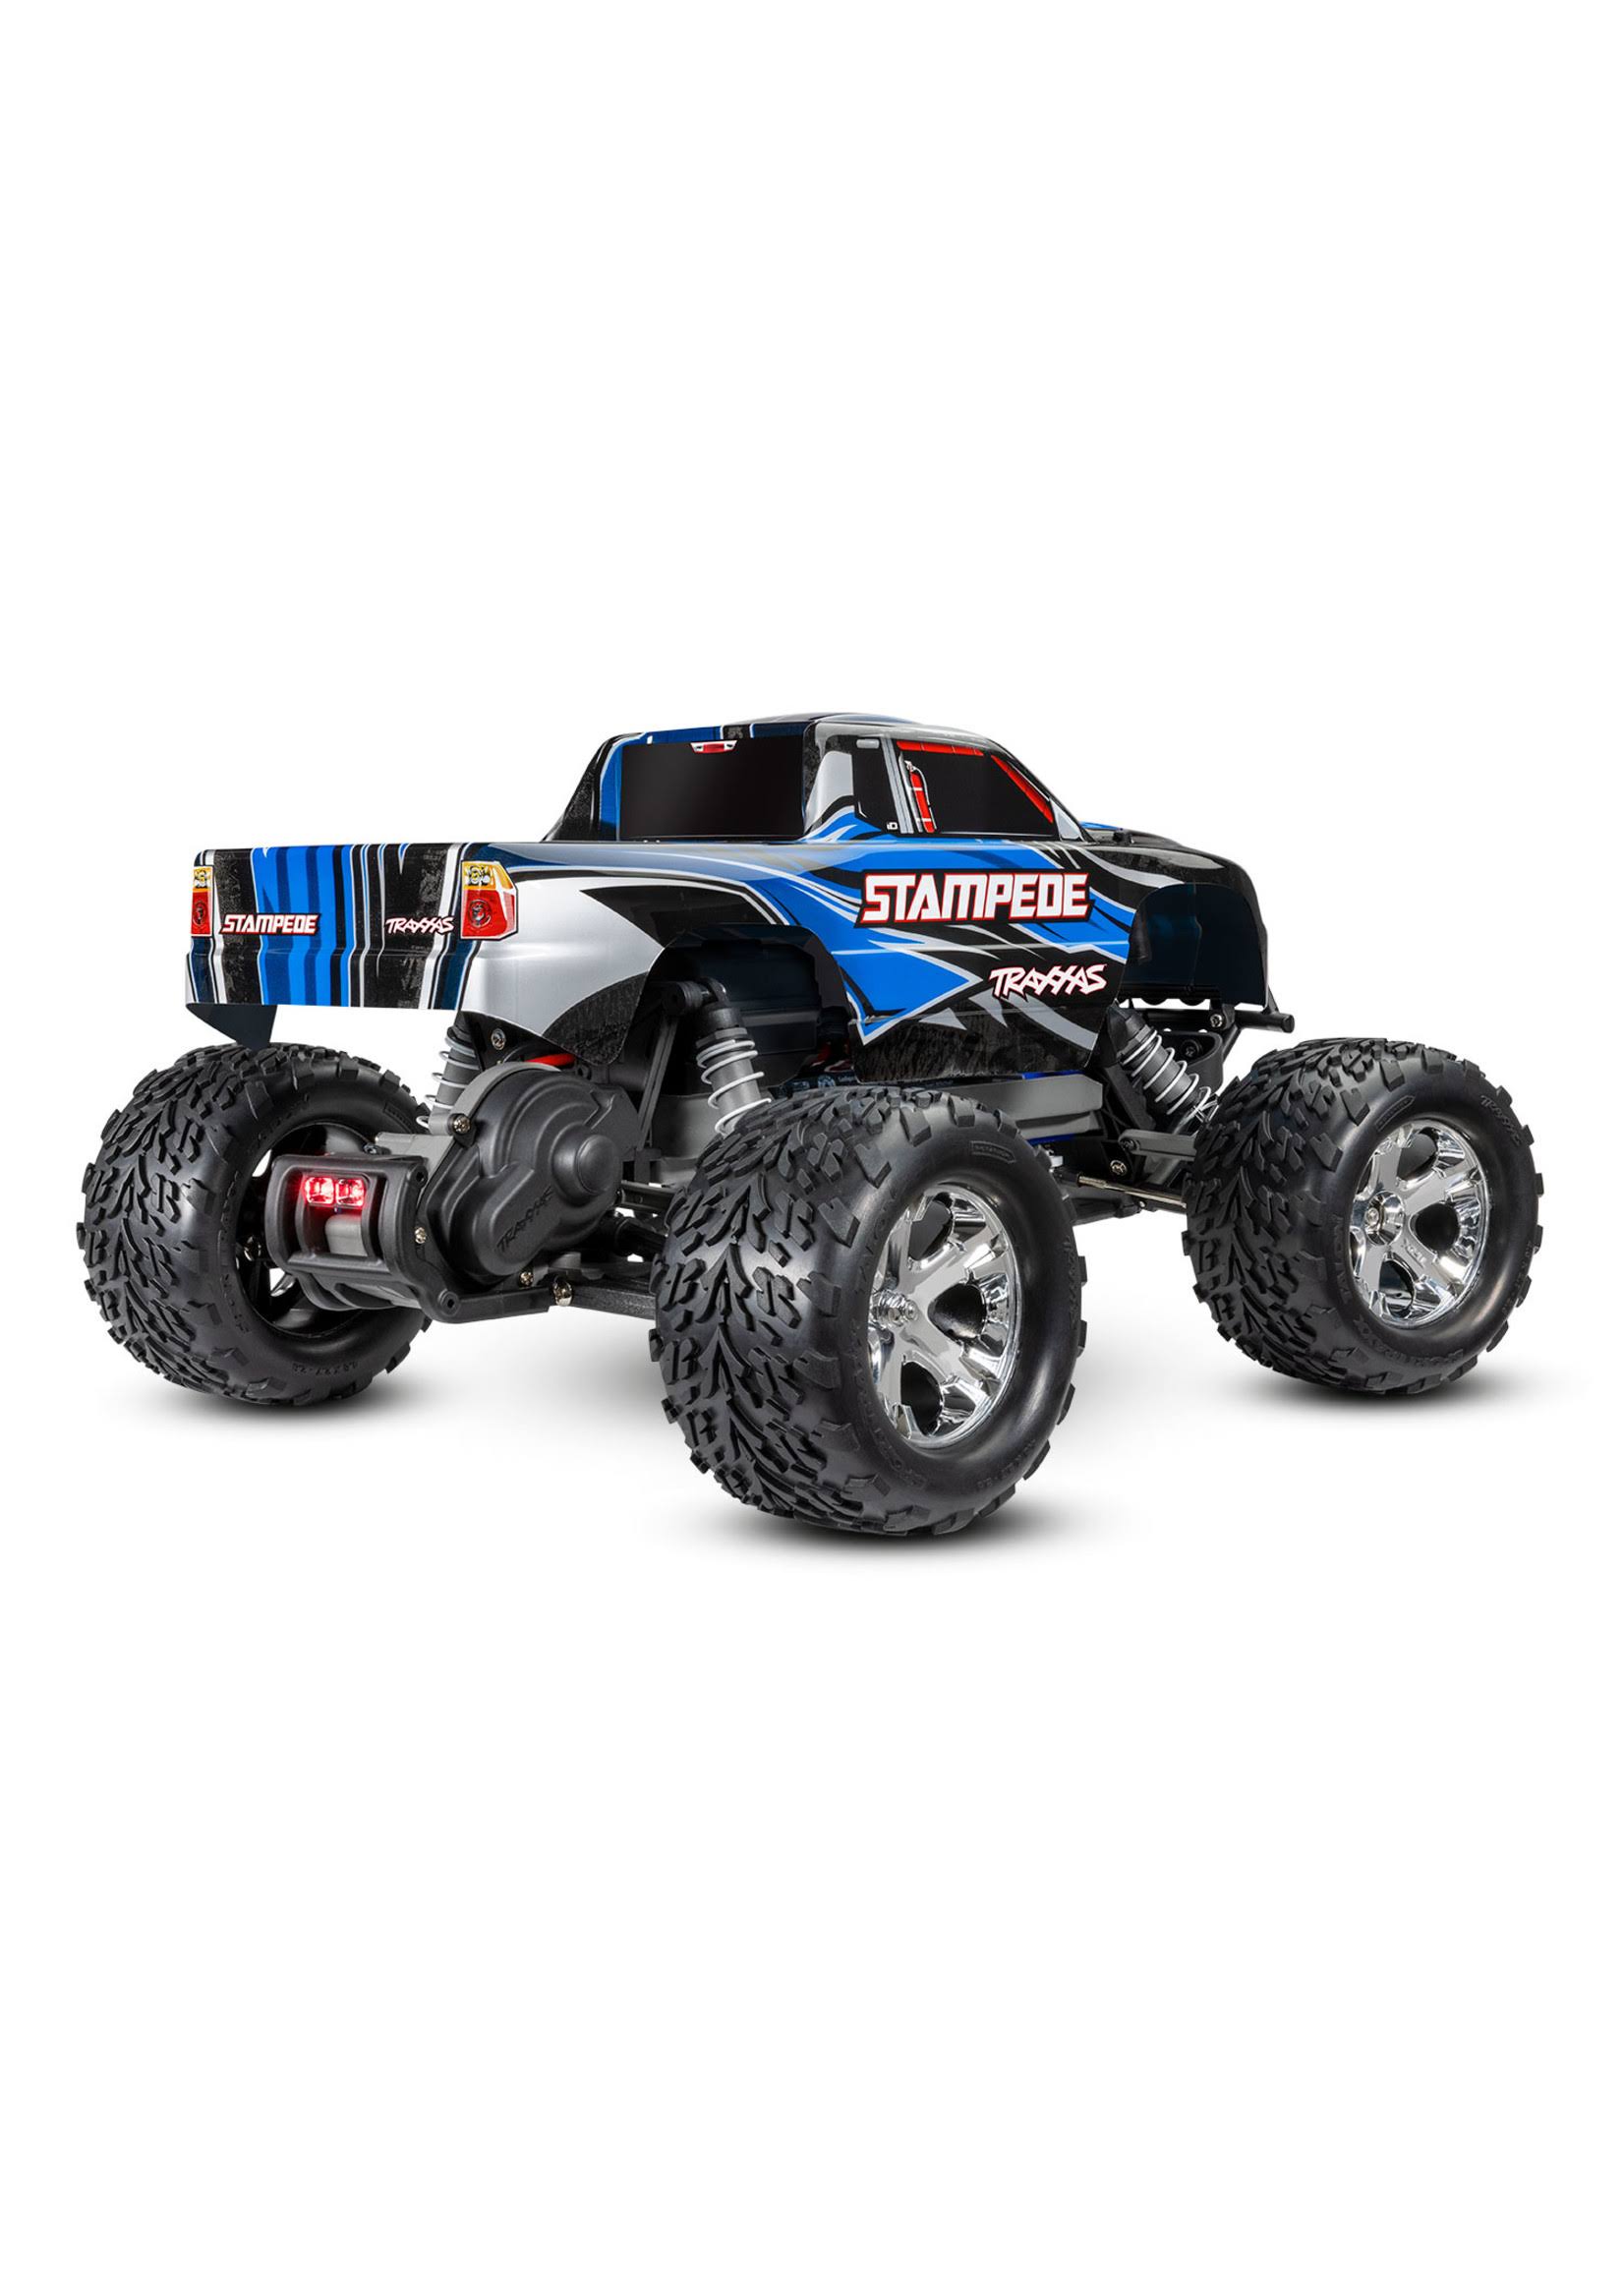 Traxxas 1/10 Stampede With LED Lights Blue